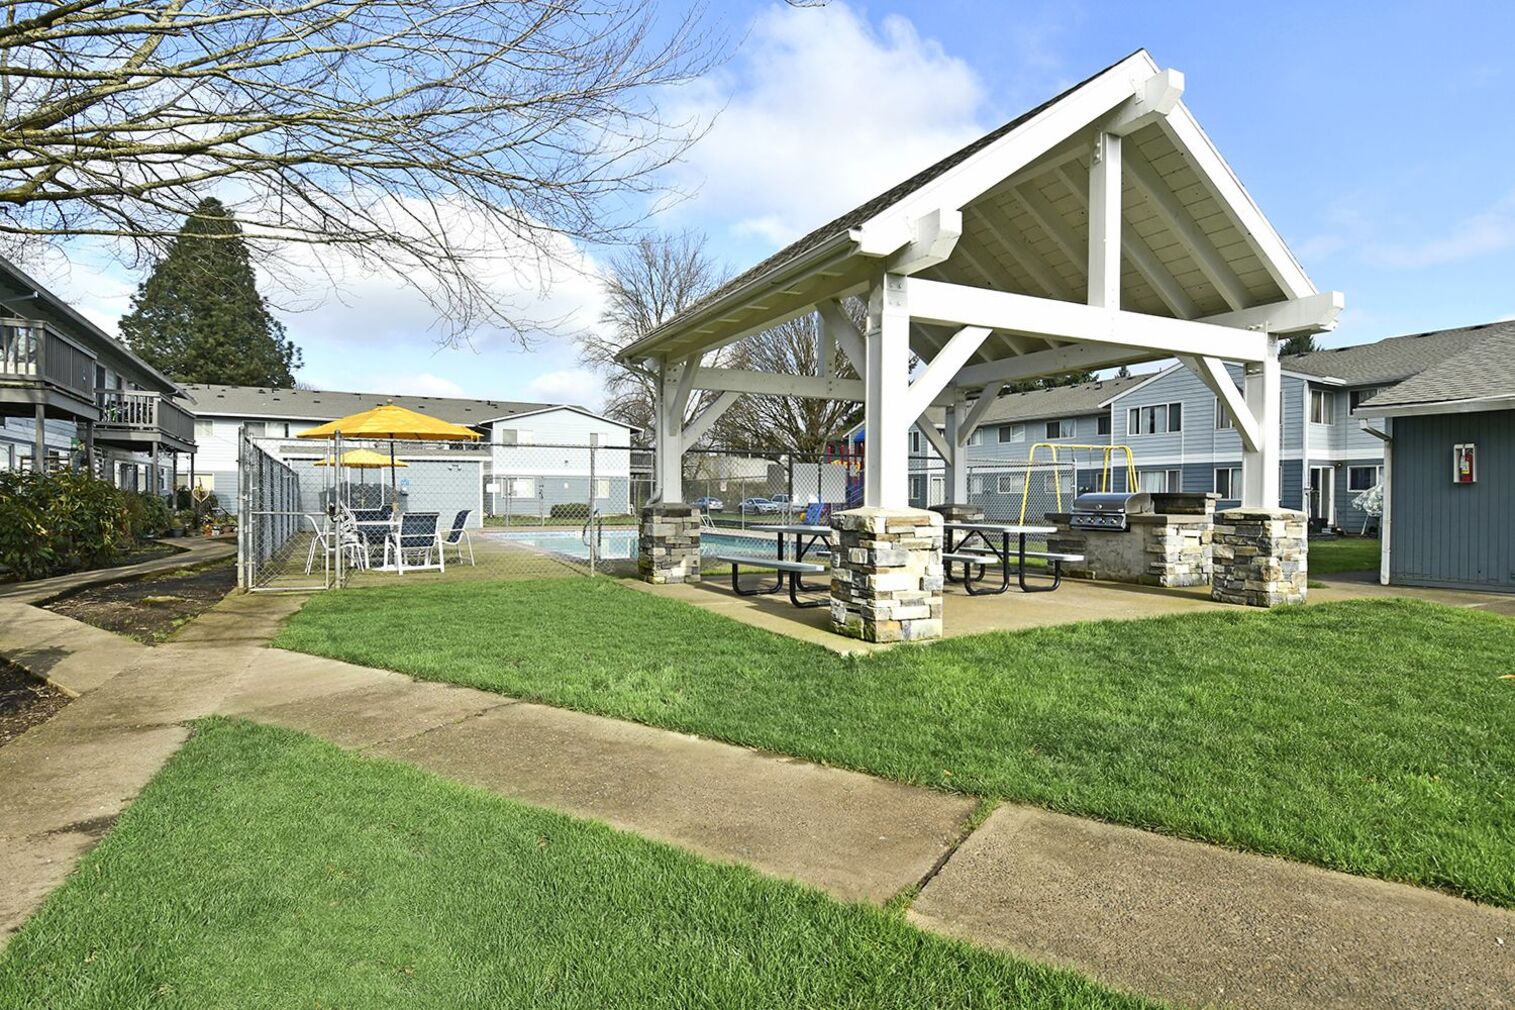 Outdoor area with fenced pool, Playground, and covered pavilion